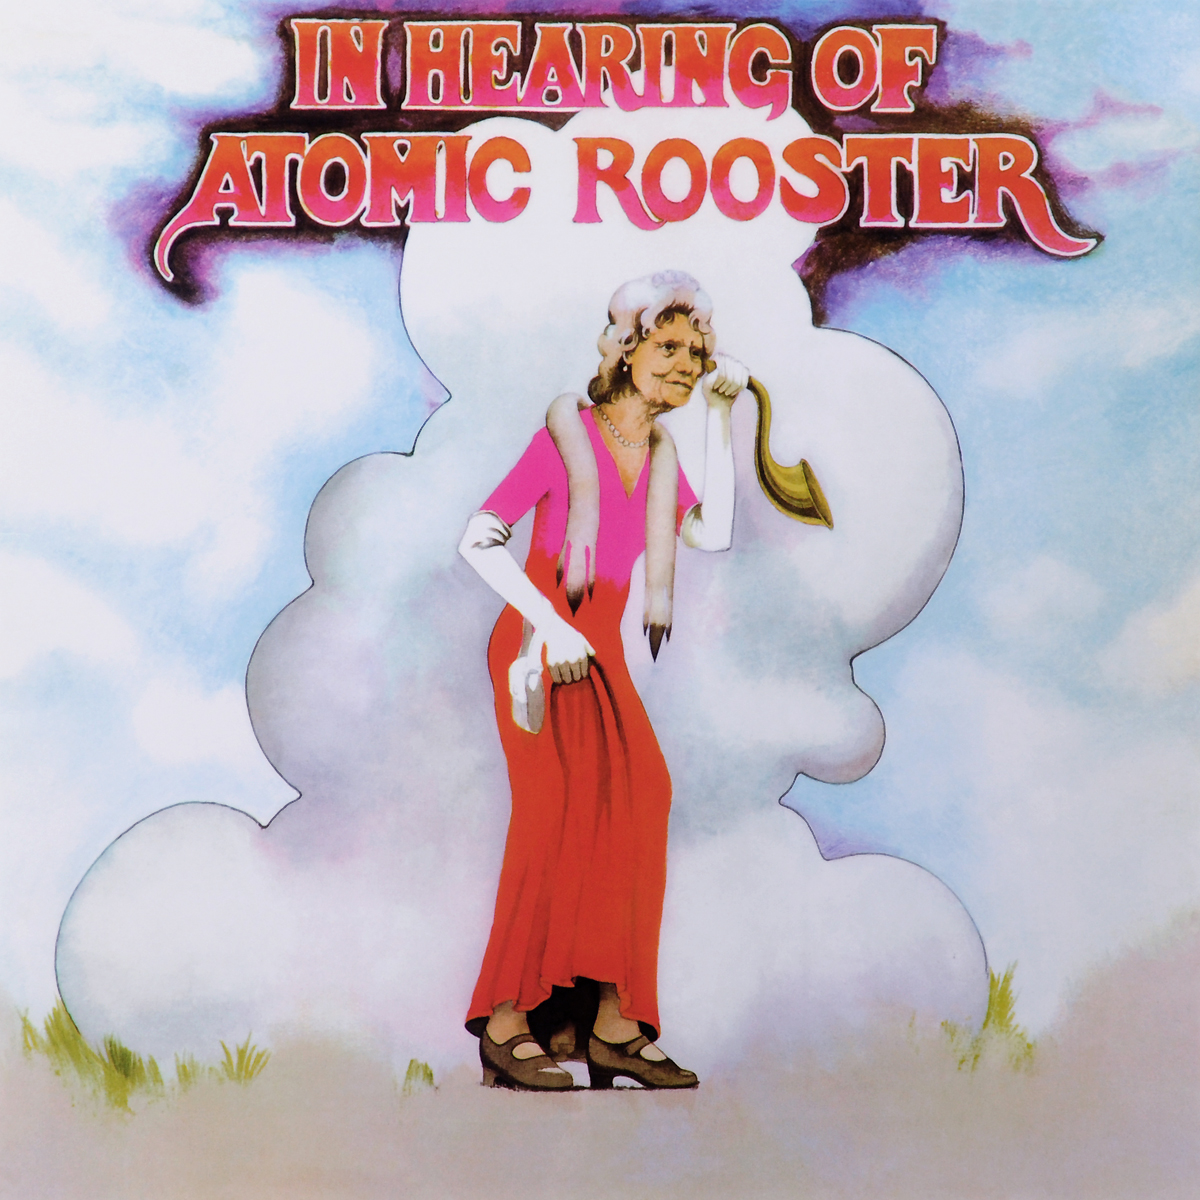 Atomic Rooster. In Hearing Of (LP)